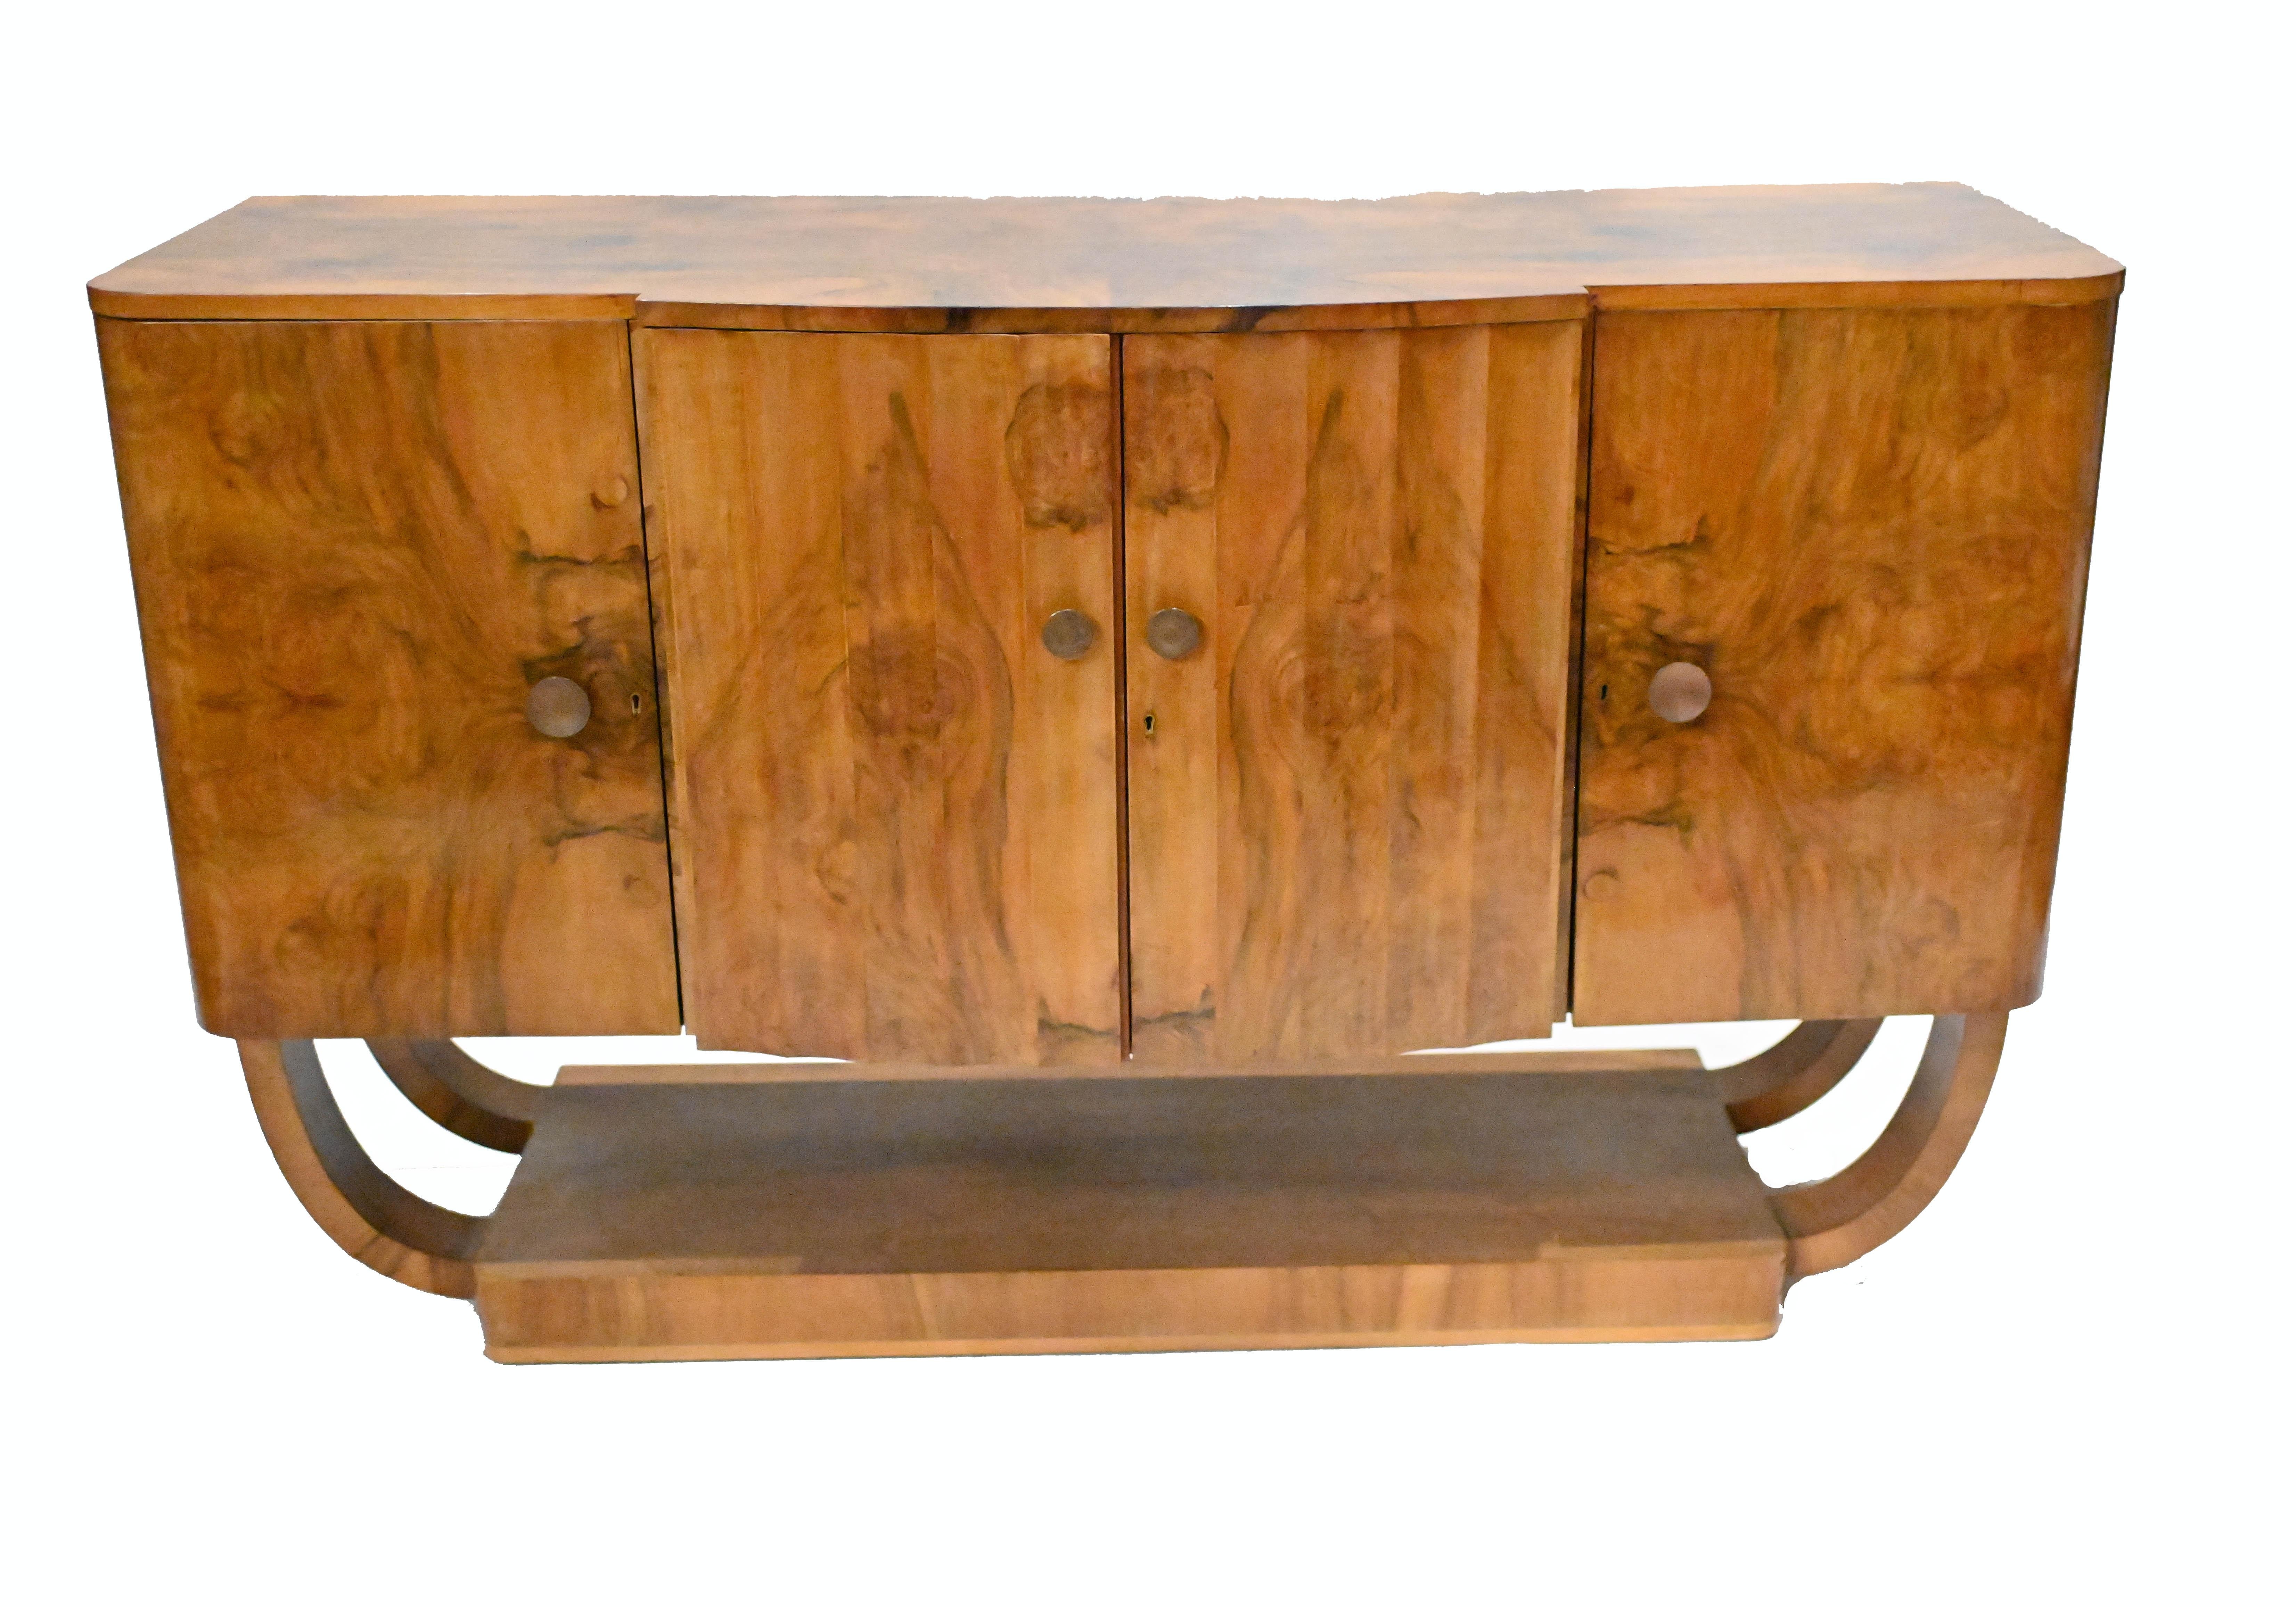 Gorgeous period art deco sideboard or cabinet
Circa 1930 on this piece hand crafted from burr walnut
Features ribbed cupboards in the centre
Clean and minimal design perfect for modern interiors
Great interiors look and we are expecting a lot of